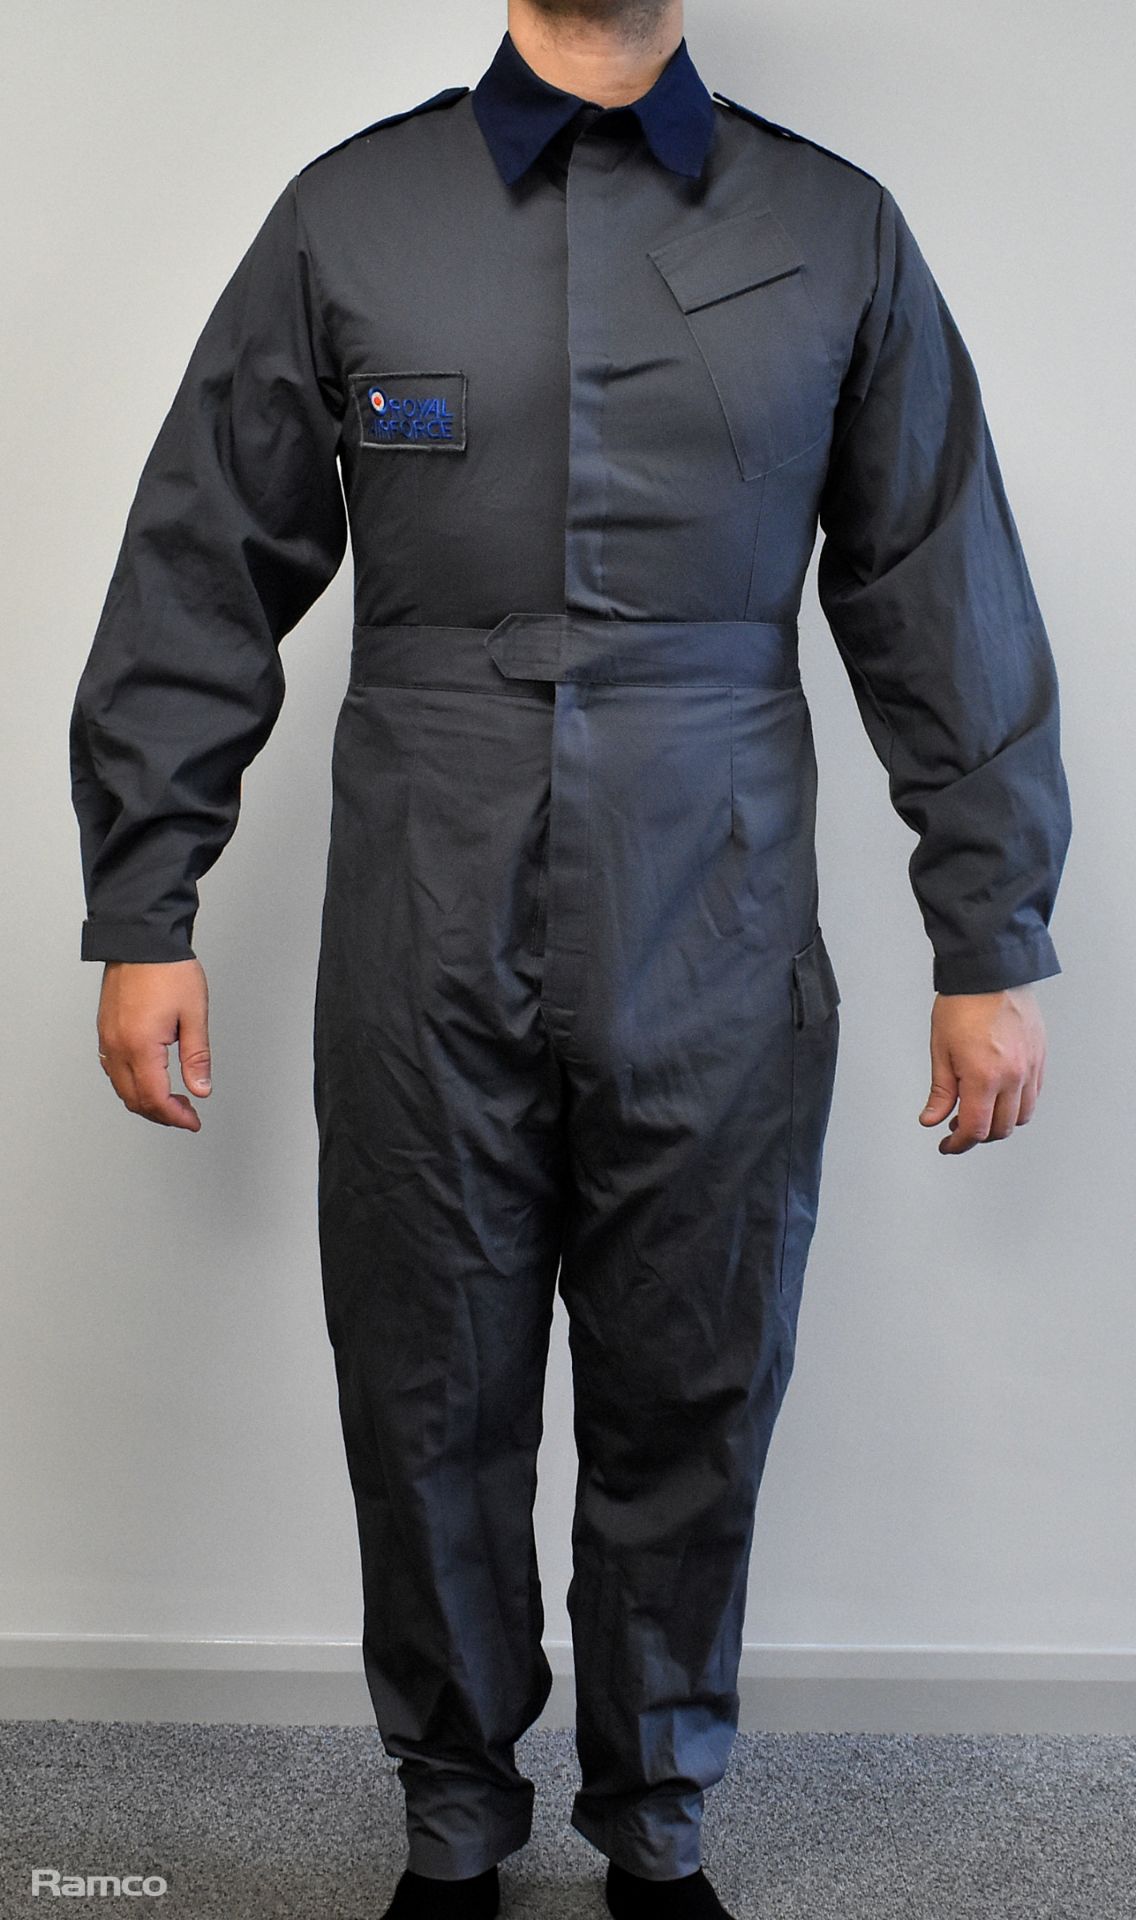 100x British Forces overalls - Blue / Grey - mixed sizes